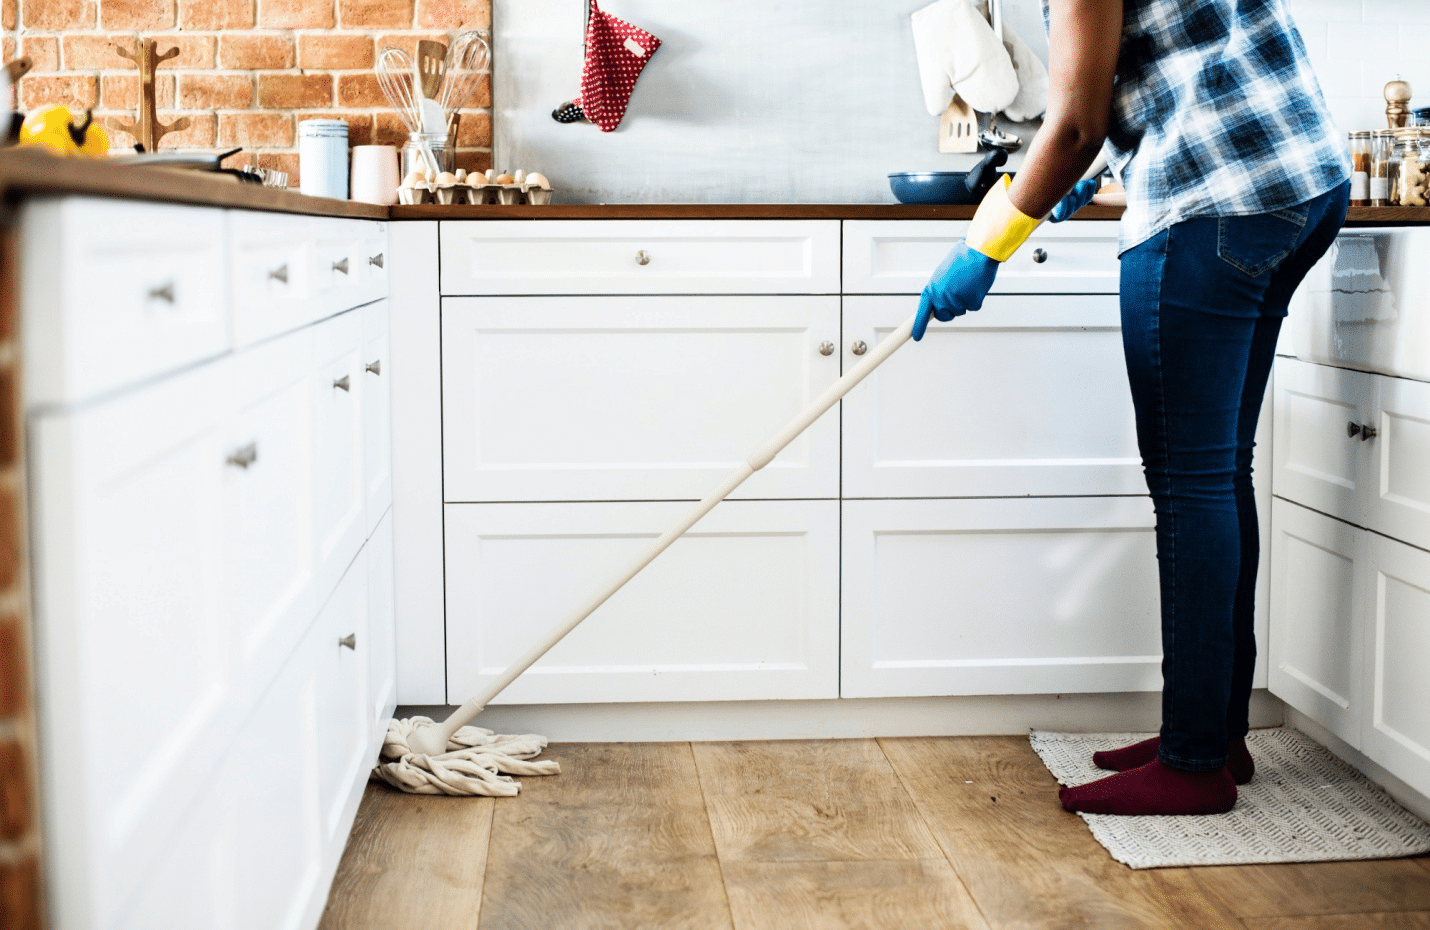 House Cleaners Use Harsh Chemical Cleaning Products